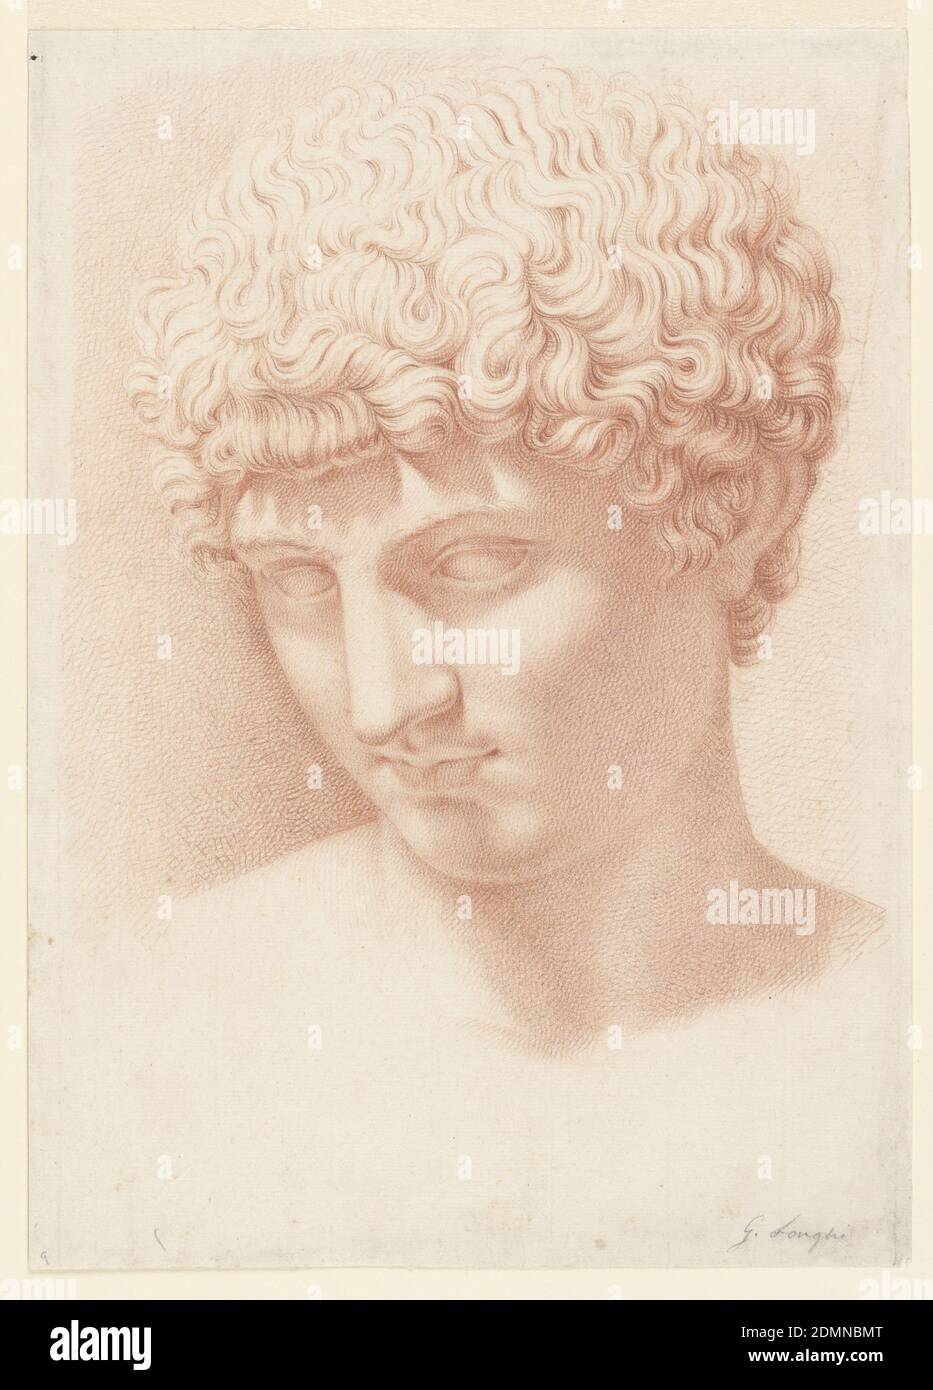 Head of Apollo, Giuseppe Longhi, Italian, 1766–1831, Color pencil on cream paper, Drawing of the head of Apollo, the Greek and Roman god of the sun, light, music, prophecy, healing, and poetry, from a classical statue. His head, containing thick, curly hair, is facing one-quarter right and tilted slightly downward. The drawing is rendered by means of cross-hatching., northern Italy, Italy, 1790–1830, figures, Drawing Stock Photo